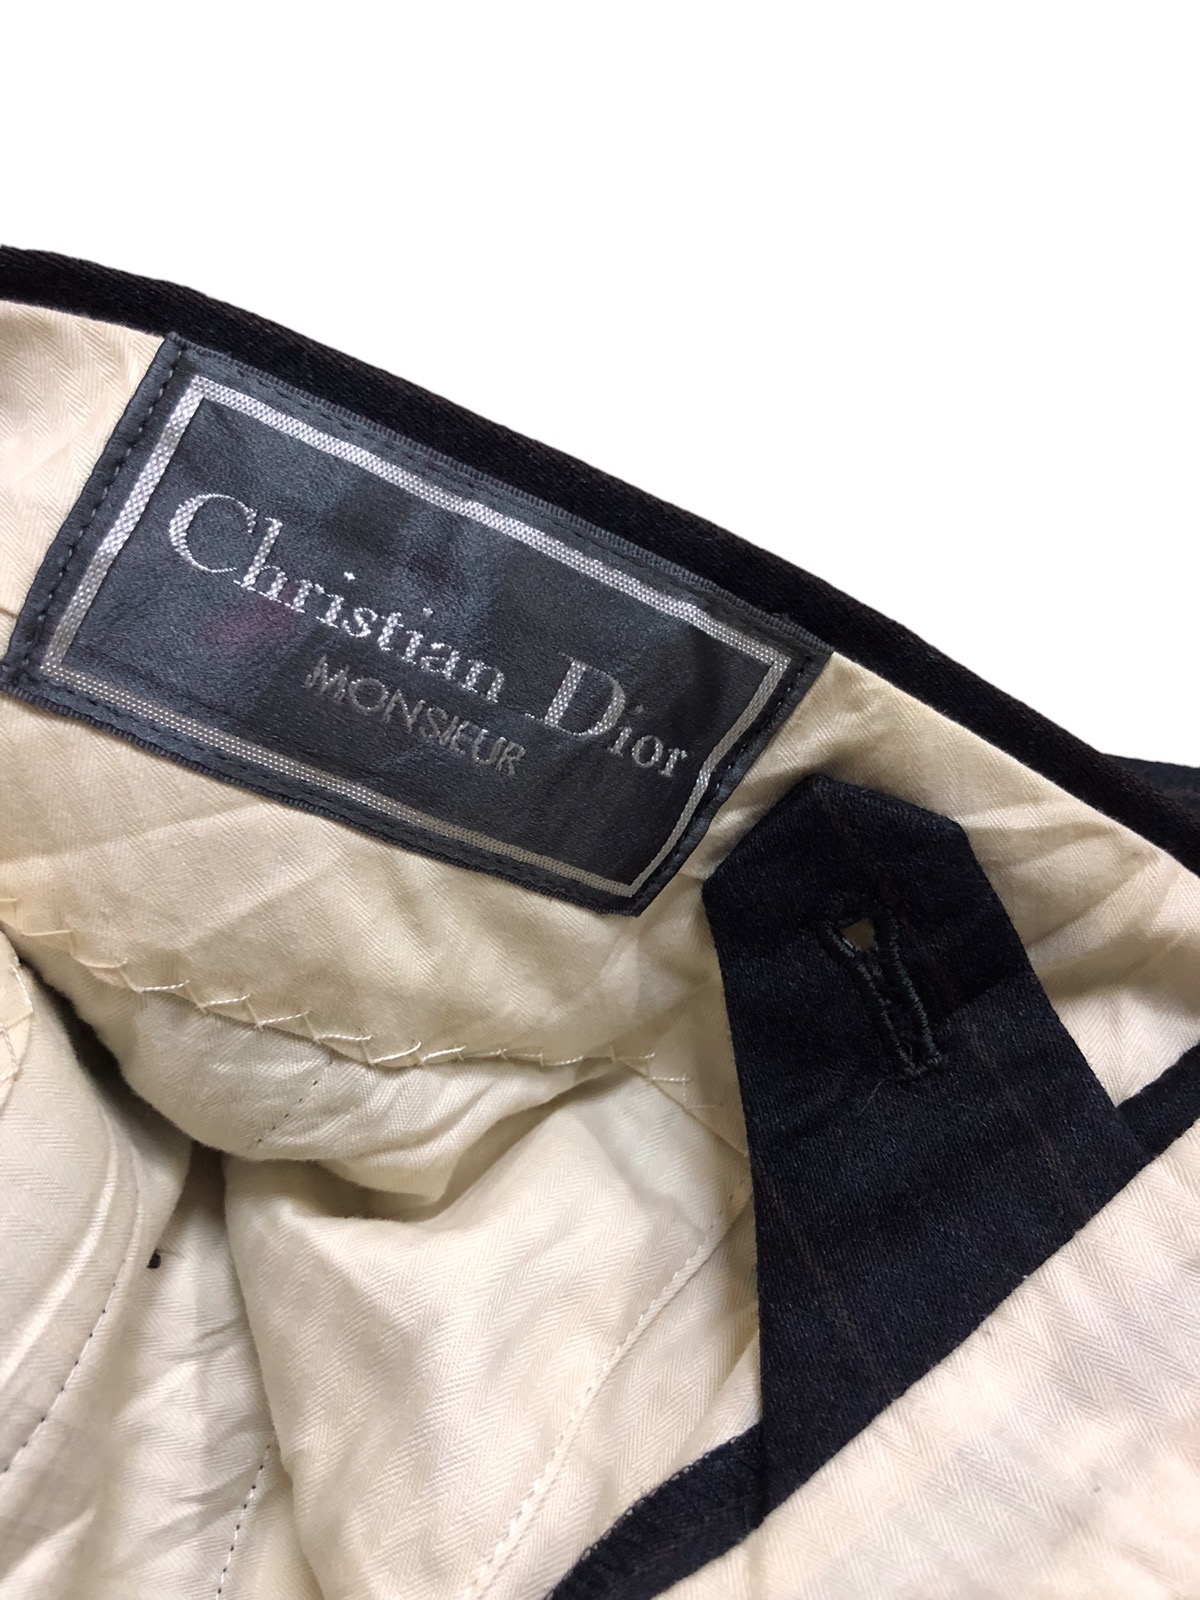 Christian Dior Monsieur - Christian dior monsieur wool classic suit black striped - 10